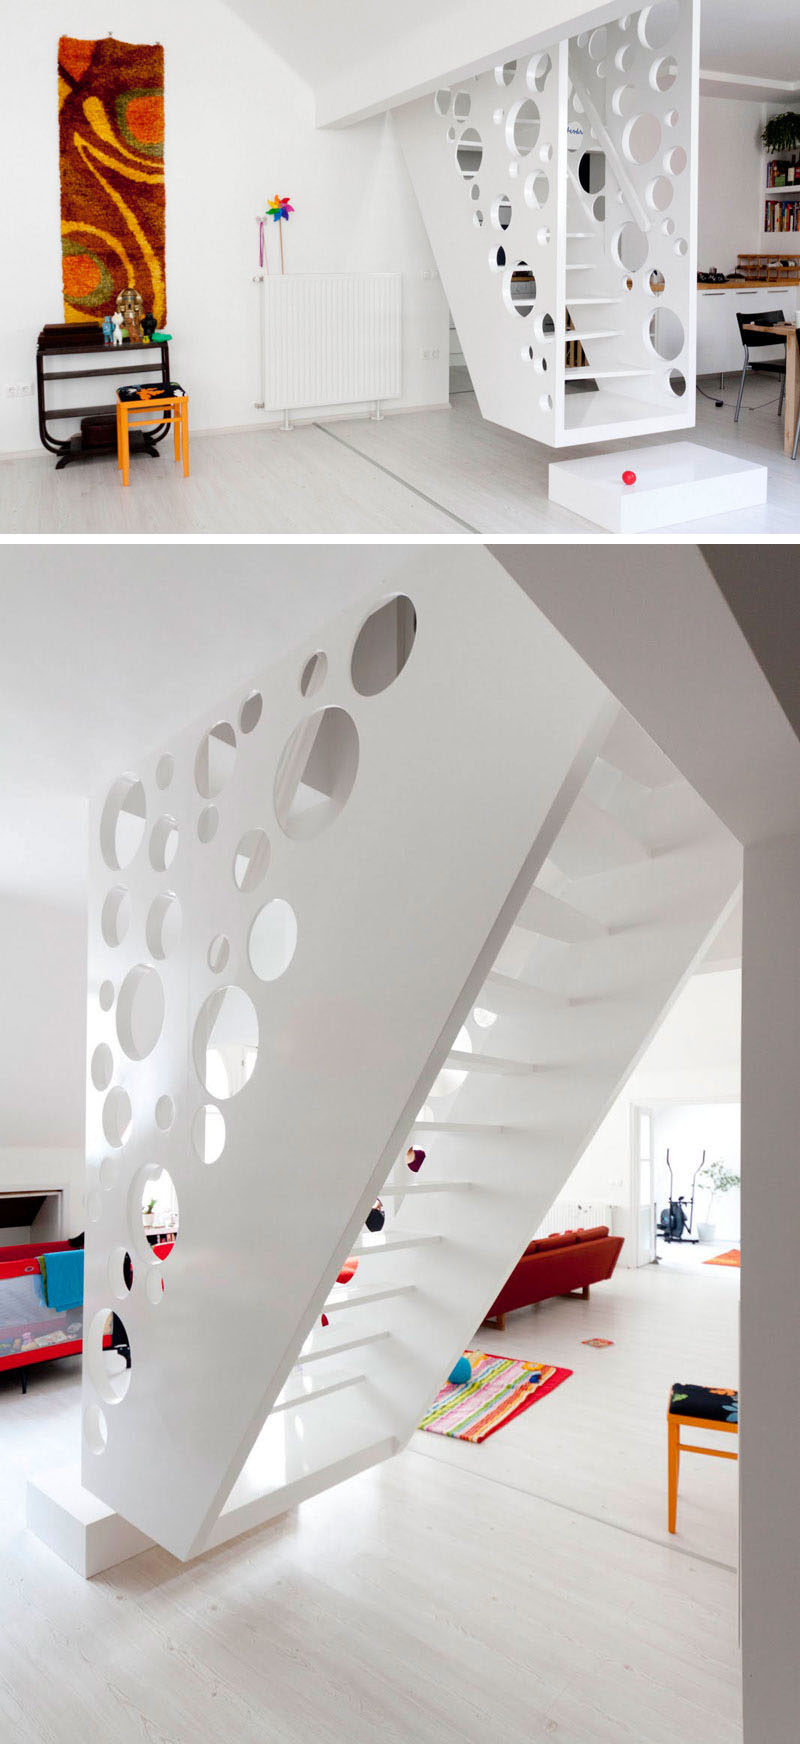 This playful, white, hanging staircase has circular cutouts on both sides to add an element of safety to the stairs and make the space feel more open and connected.